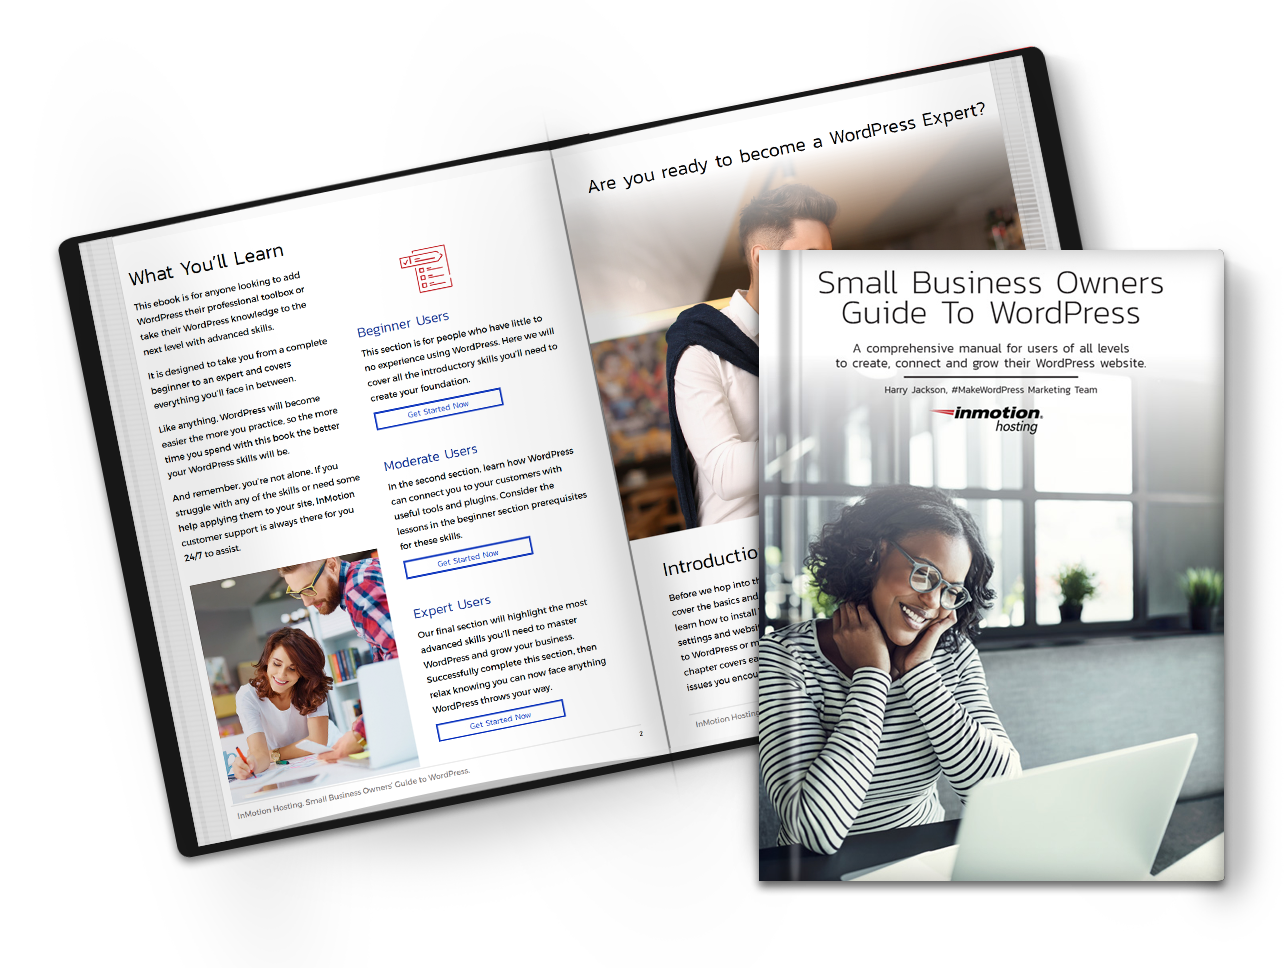 Small Business Owners Guide To WordPress